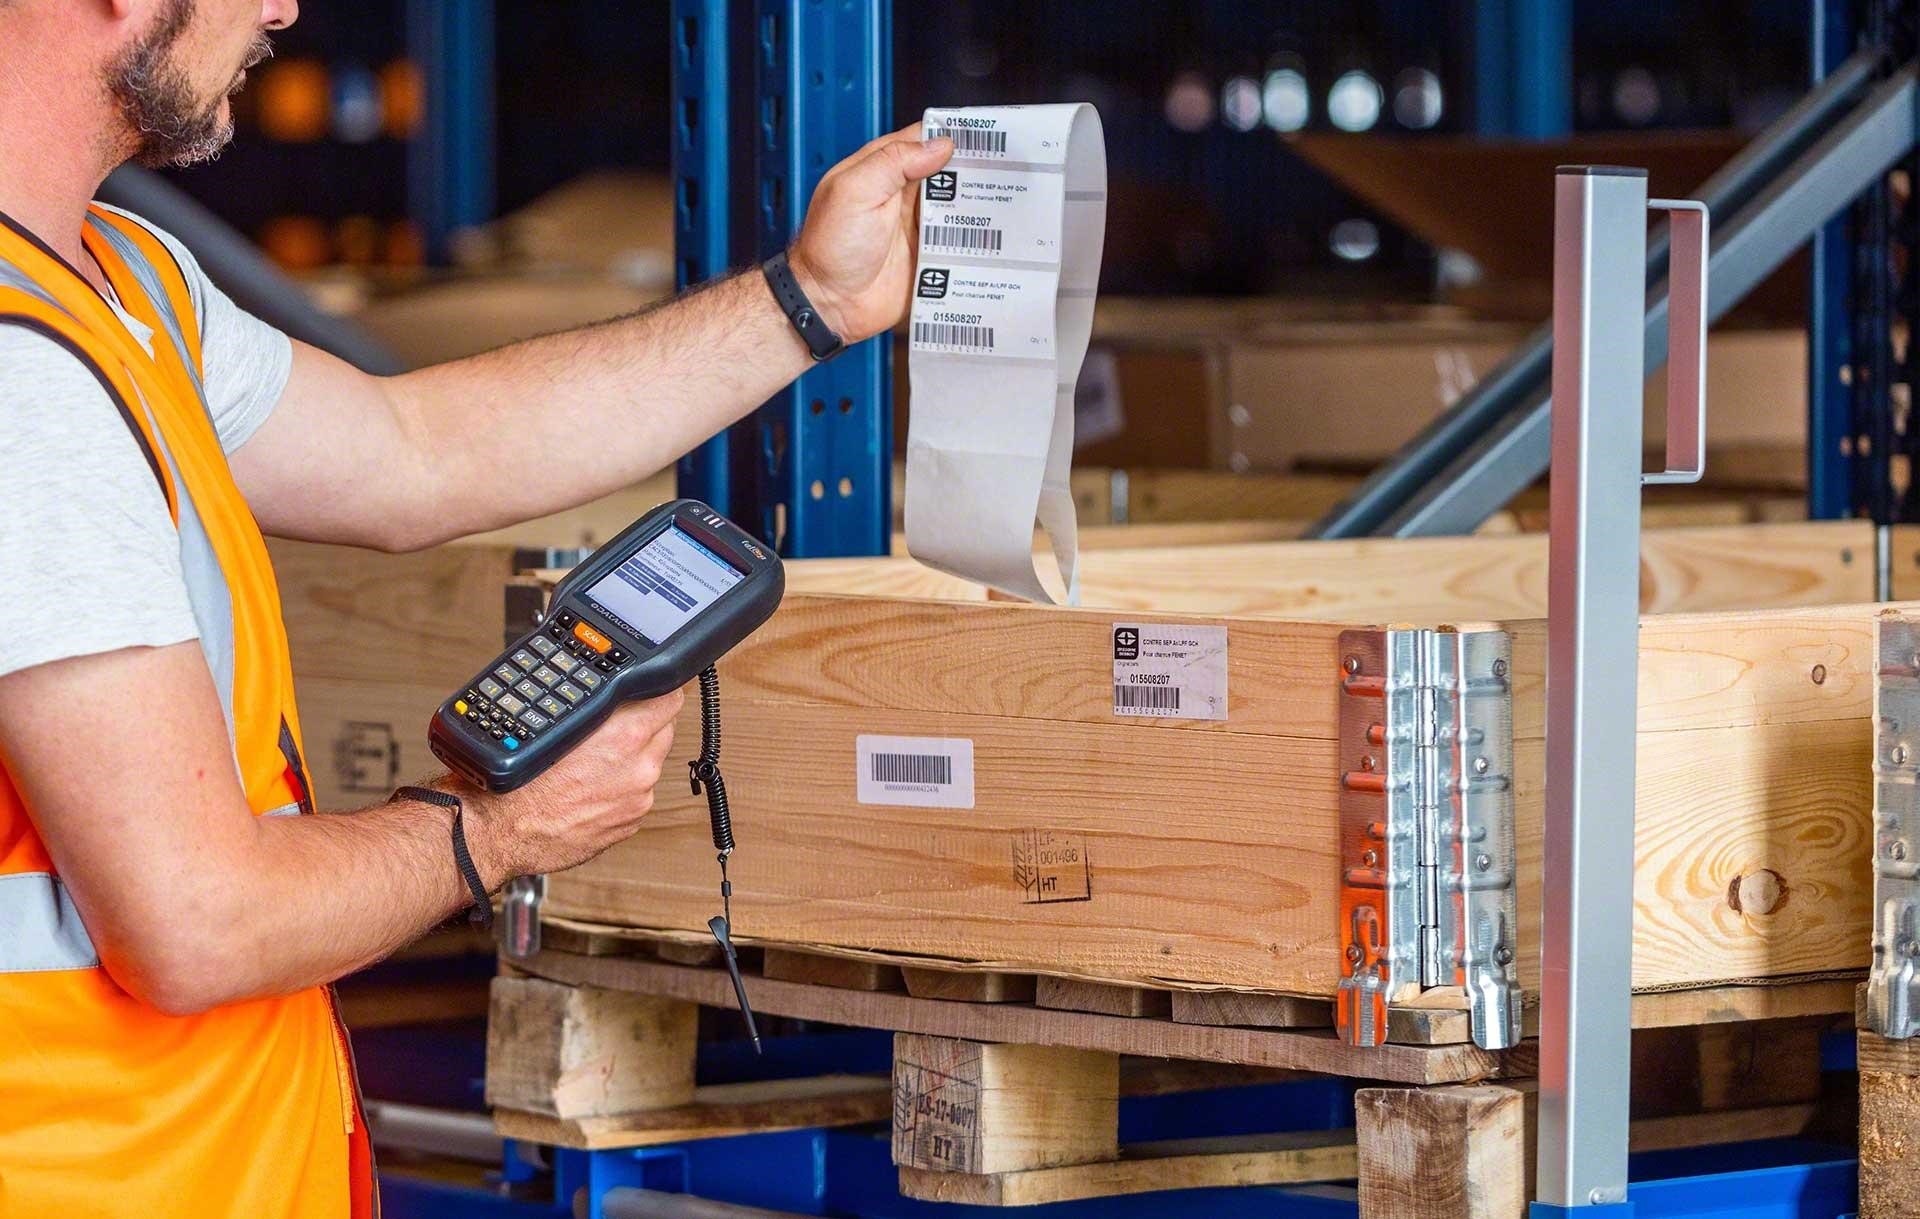 What is a SKU? Meaning and in-warehouse usage - Interlake ...